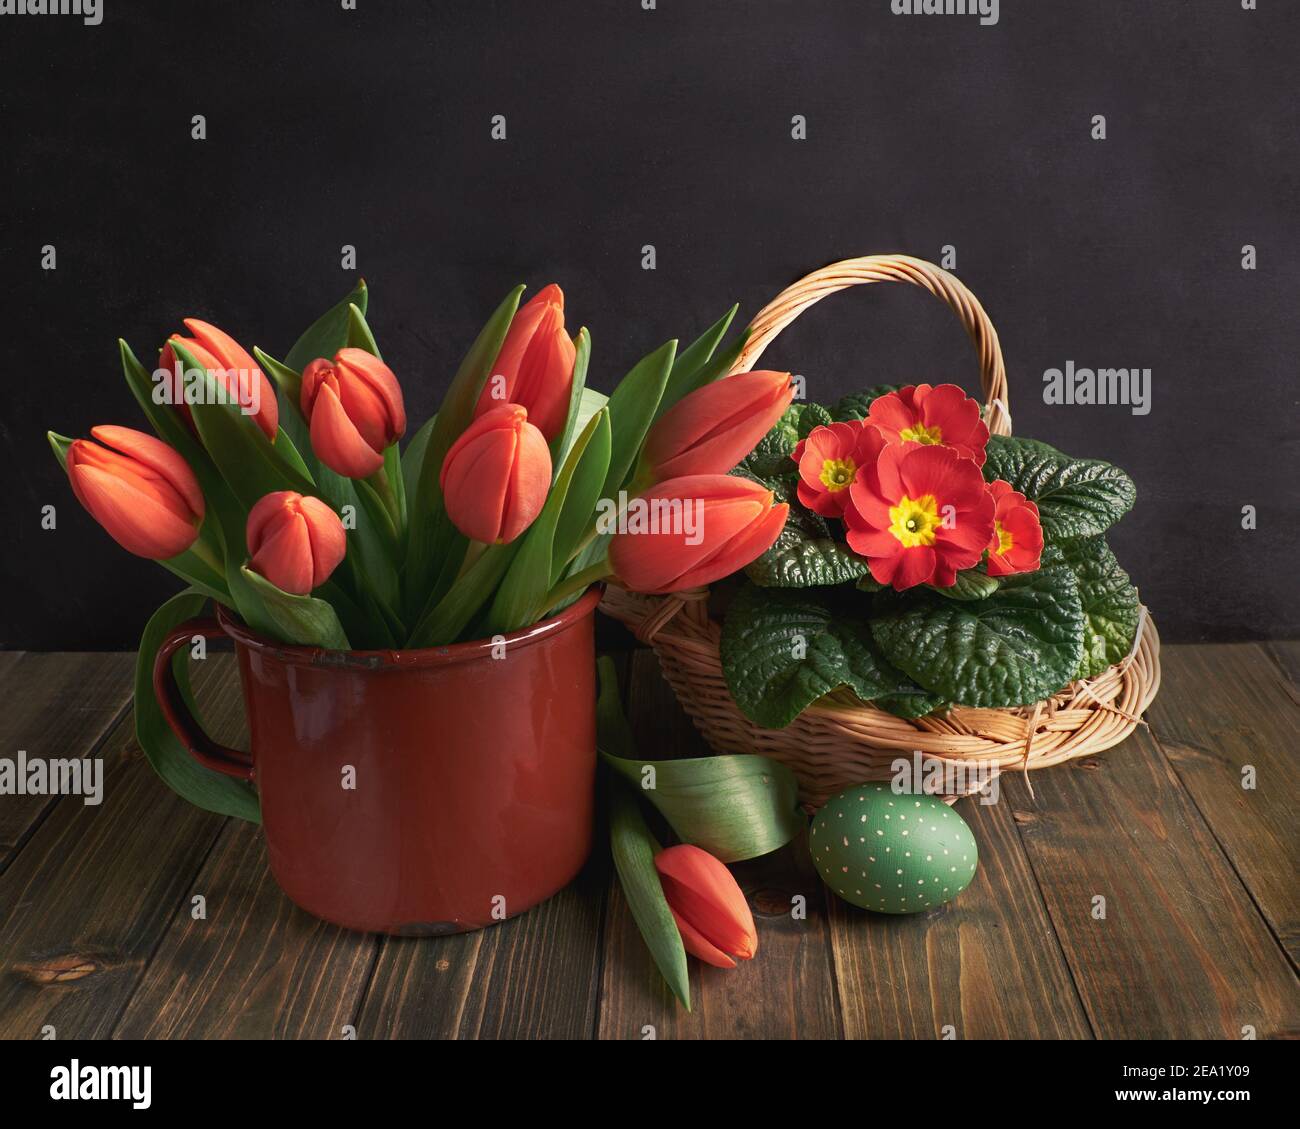 Basket with red primrose pot flowers and orange tulips in rustic metal jar on dark rustic wood. Painted chick and quail eggs. Zero waste natural Stock Photo